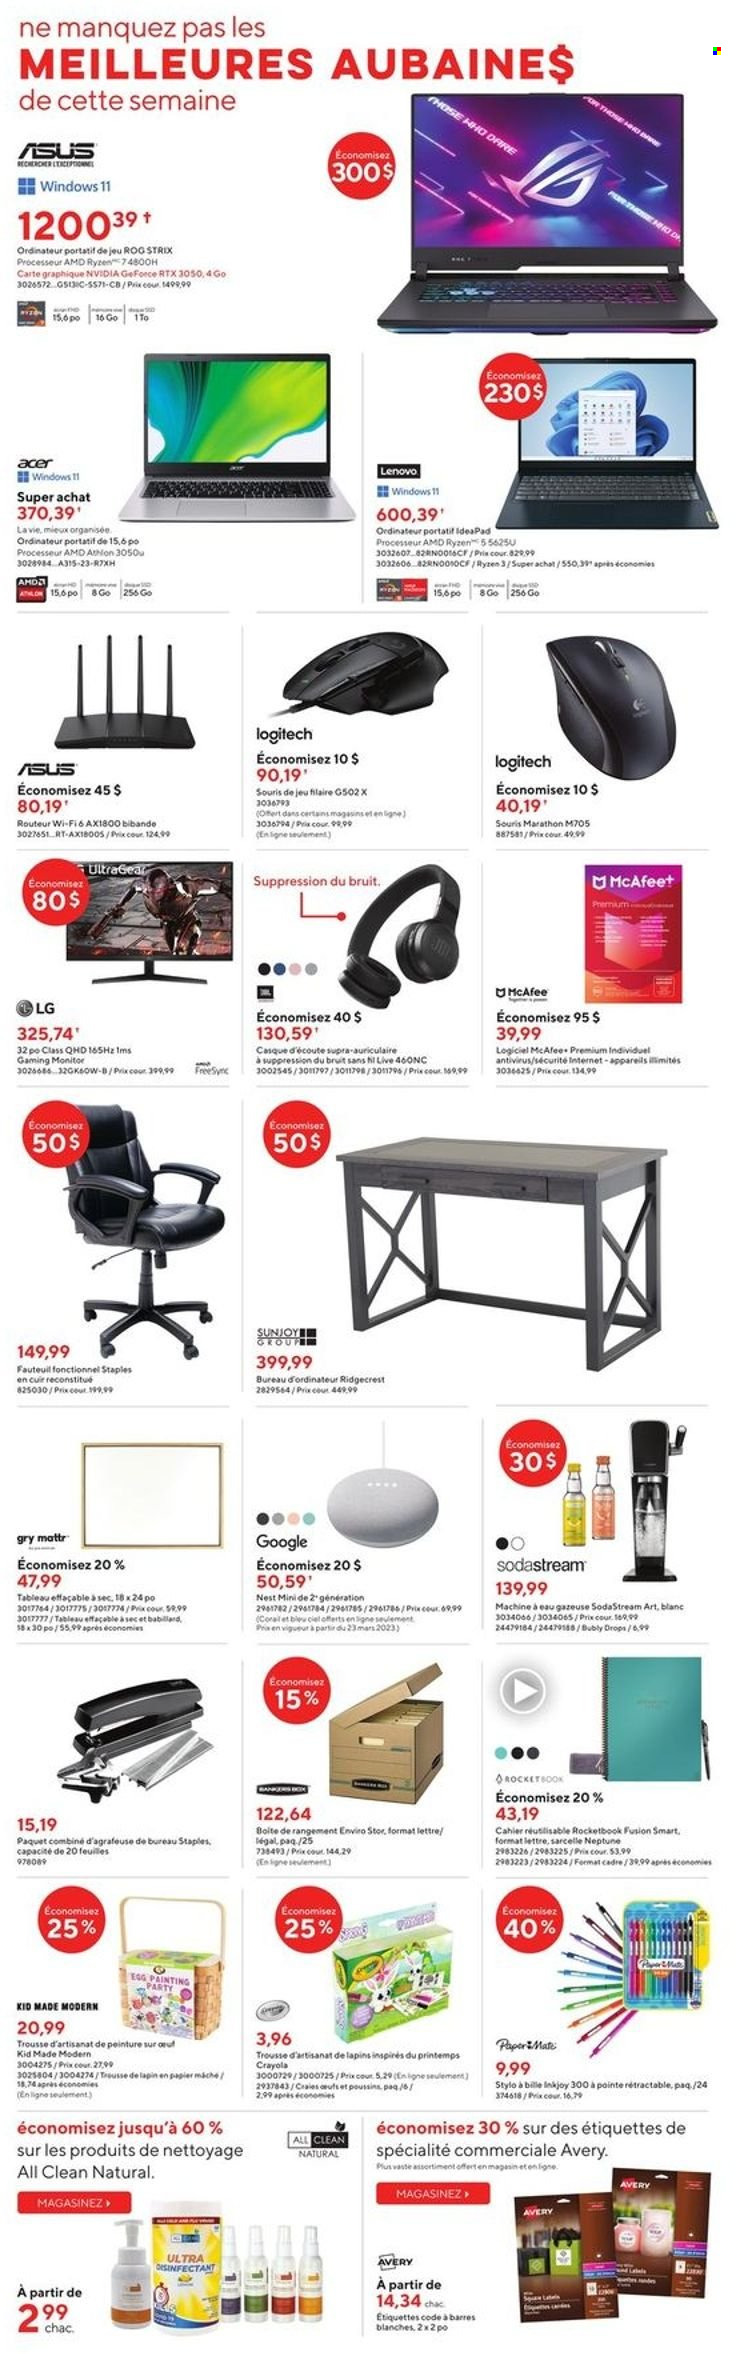 thumbnail - Bureau en Gros Flyer - March 22, 2023 - March 28, 2023 - Sales products - anti-virus, SodaStream, crayons, Paper Mate, rog strix, GeForce, Ryzen, Logitech, monitor, Acer, Asus, Lenovo, LG, desinfection. Page 2.